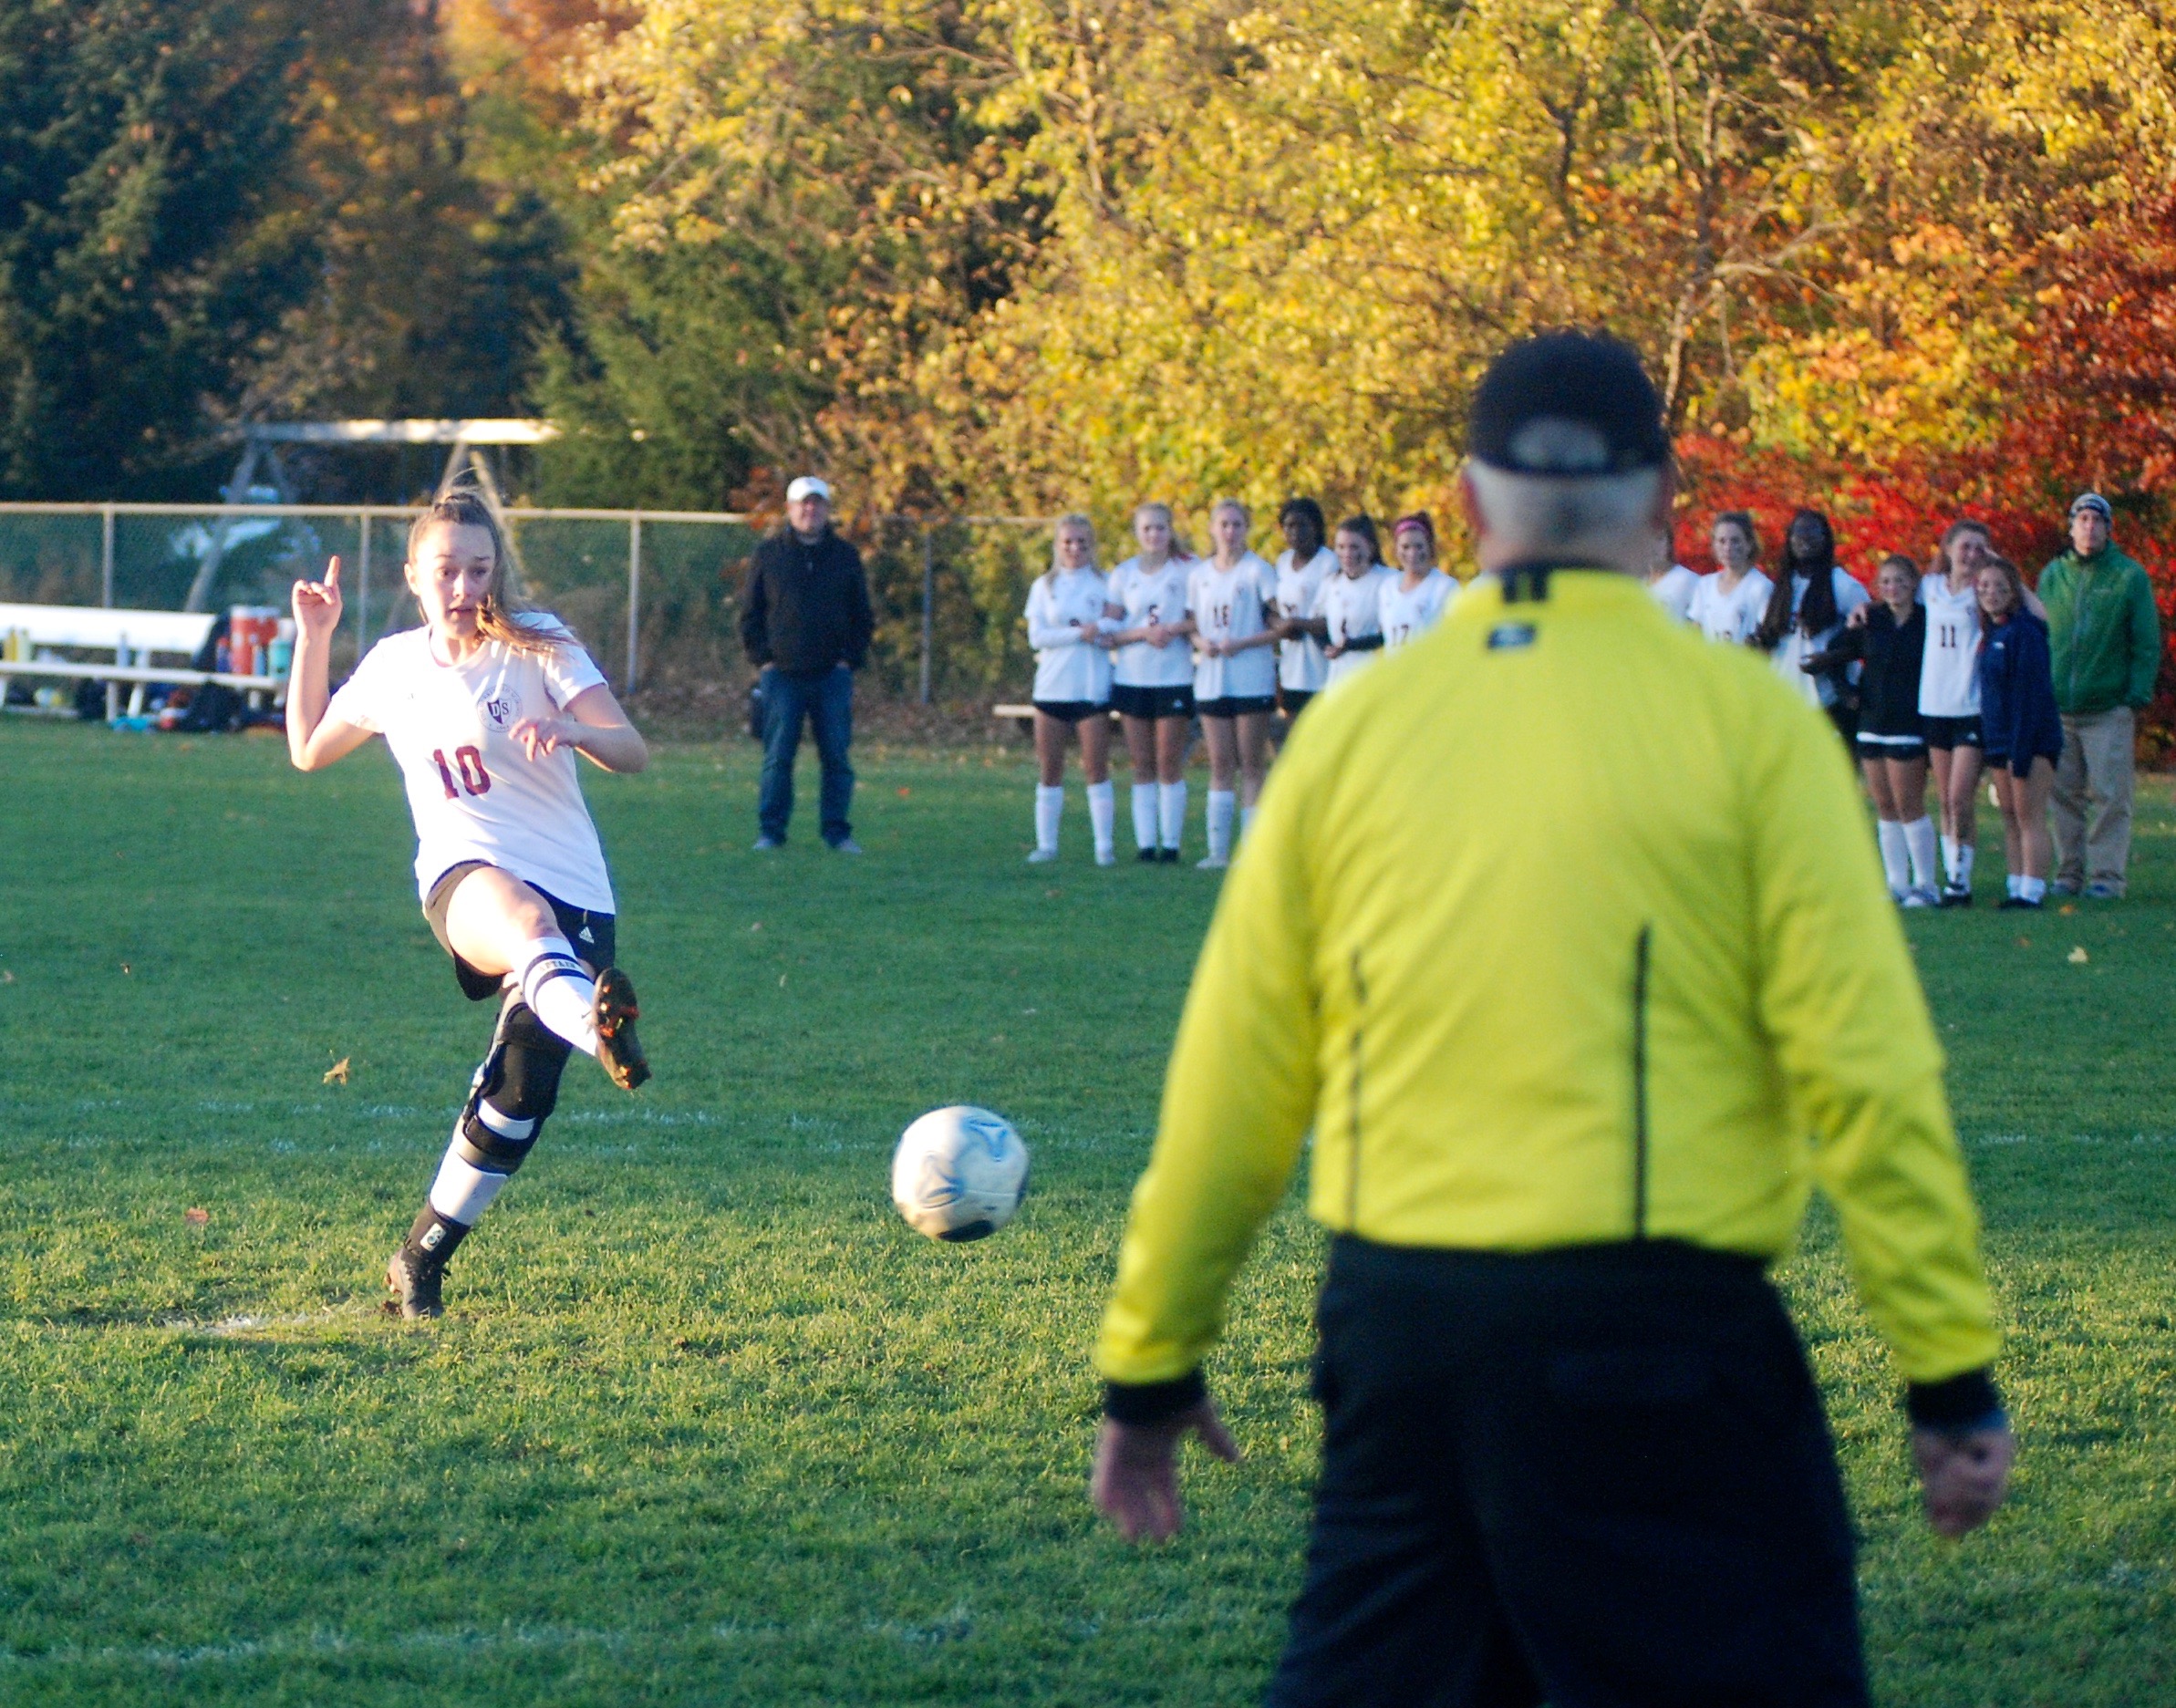 Emma Losey may have inadvertently called her shot as she made the first of 4 Derryfield PKs.